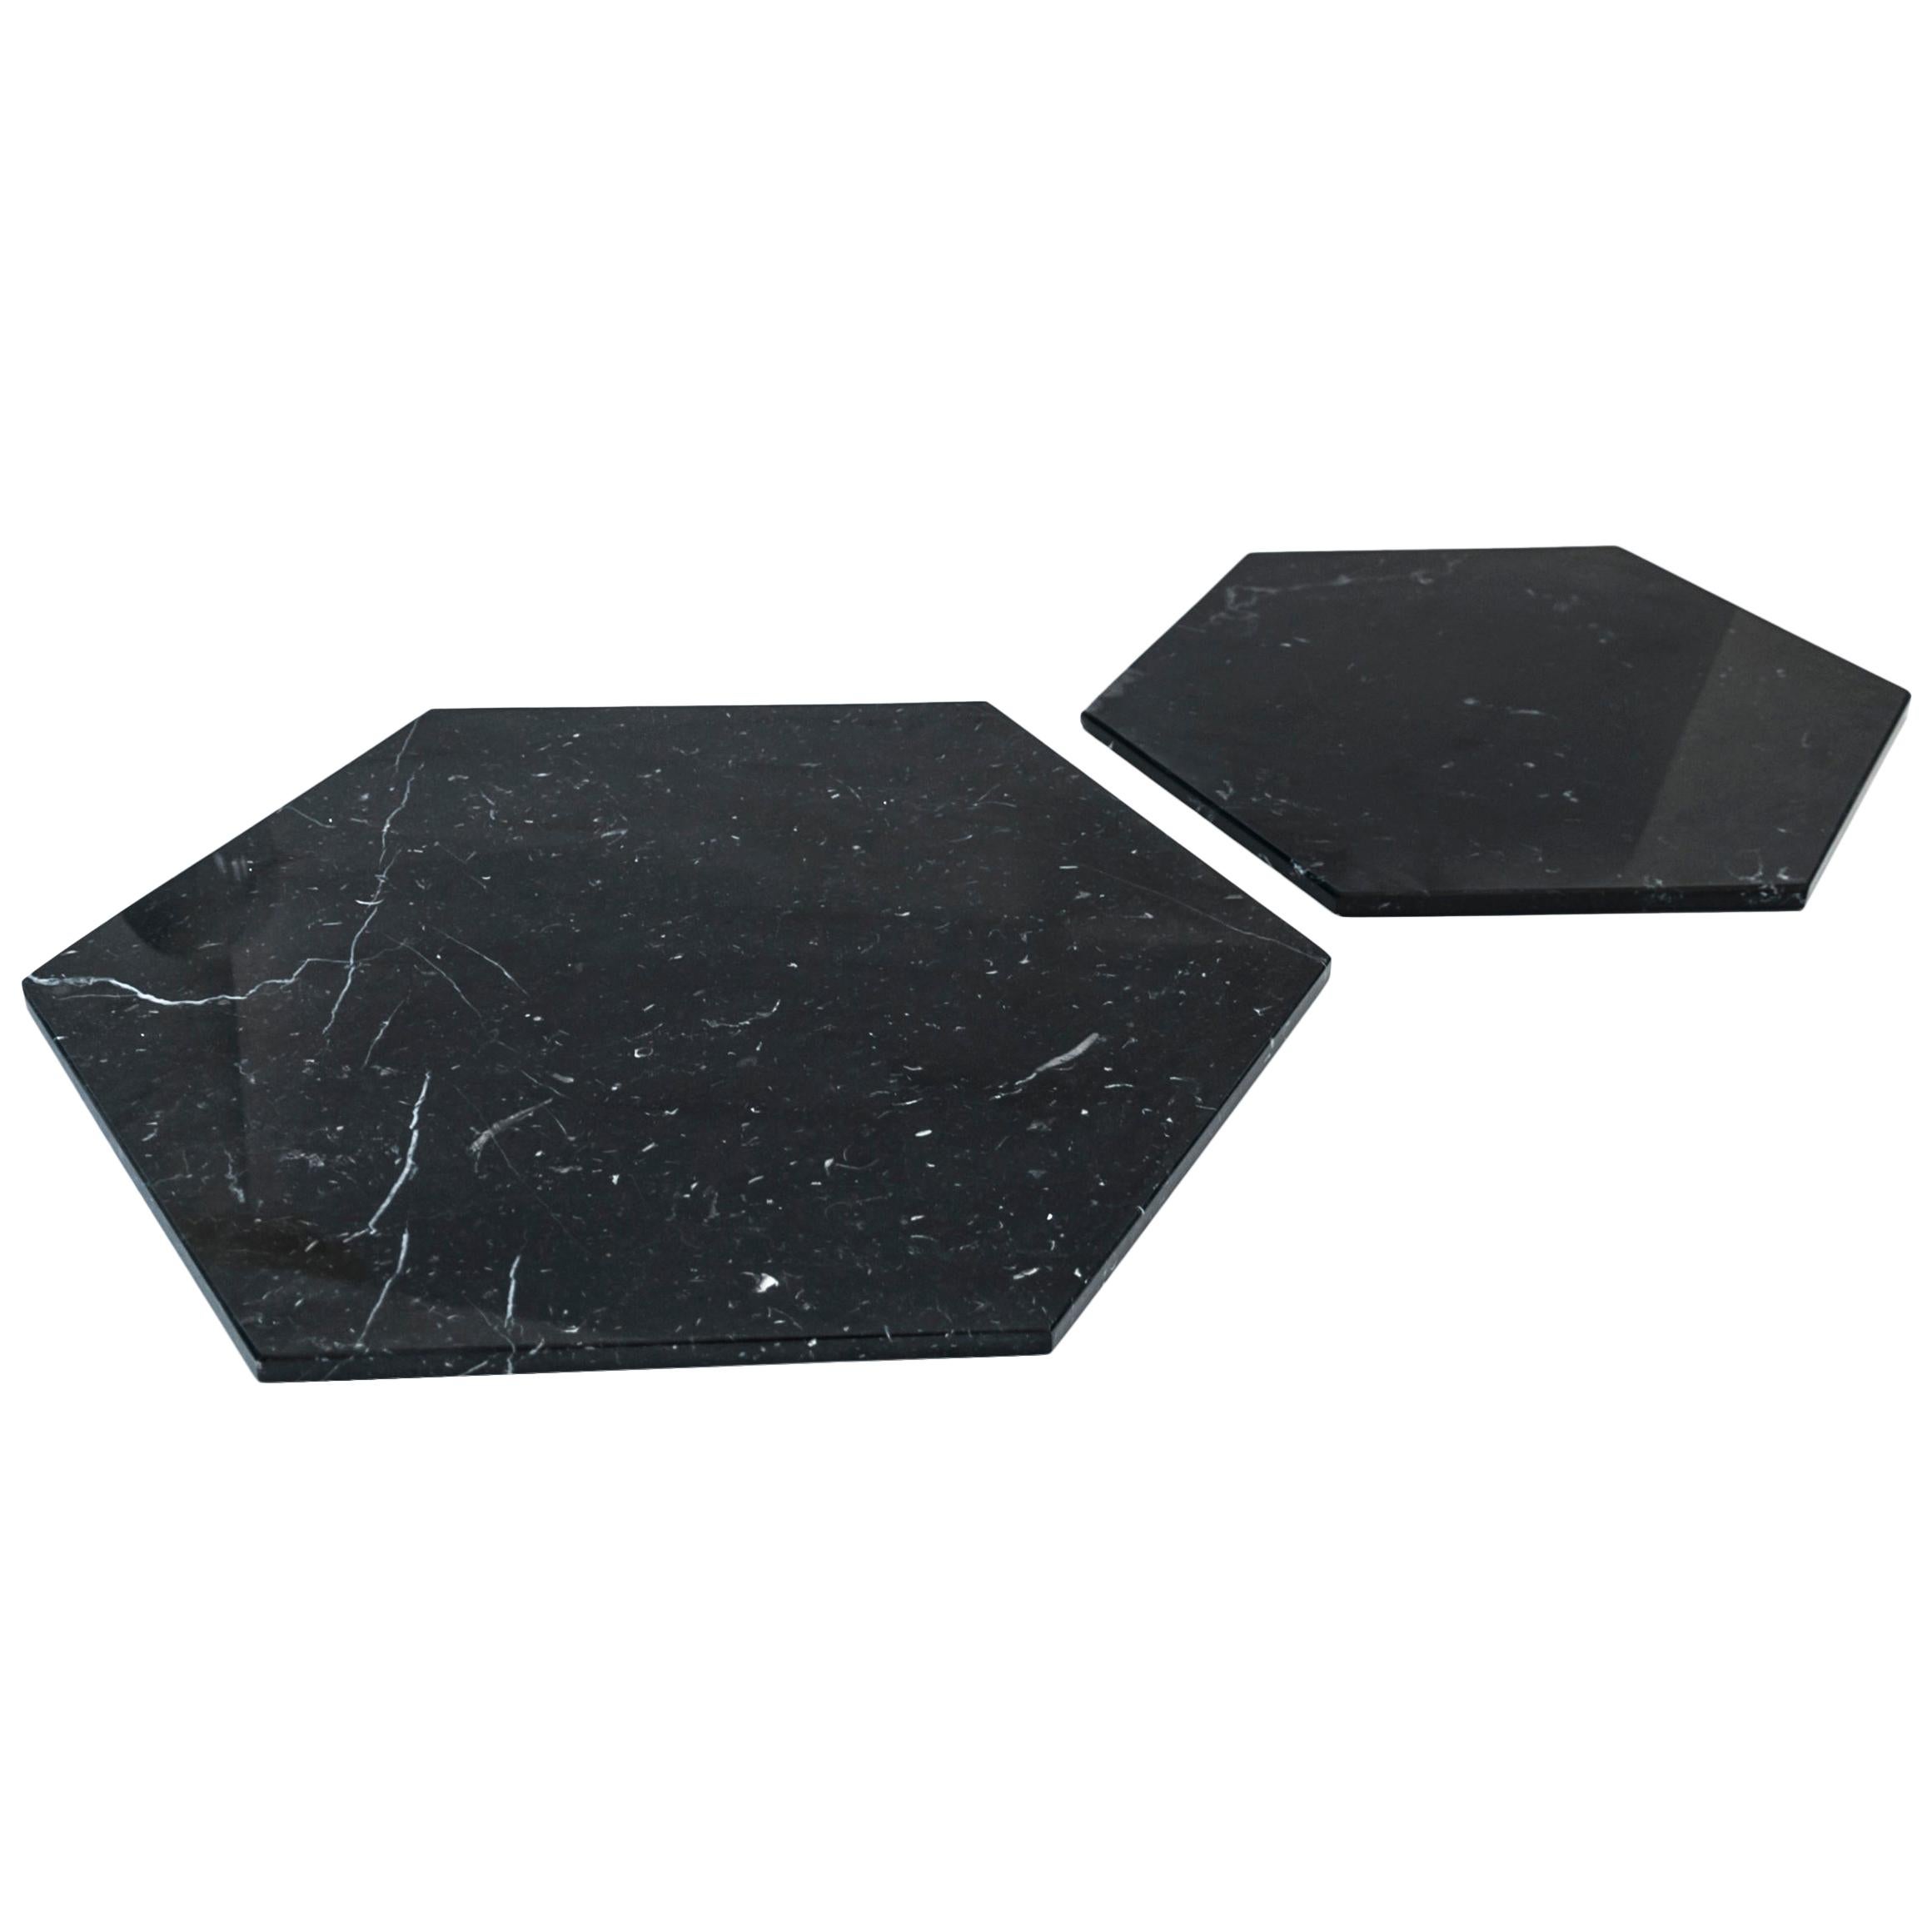 Set of 2 Big Hexagonal Black Marble Plates / Serving Dishes 